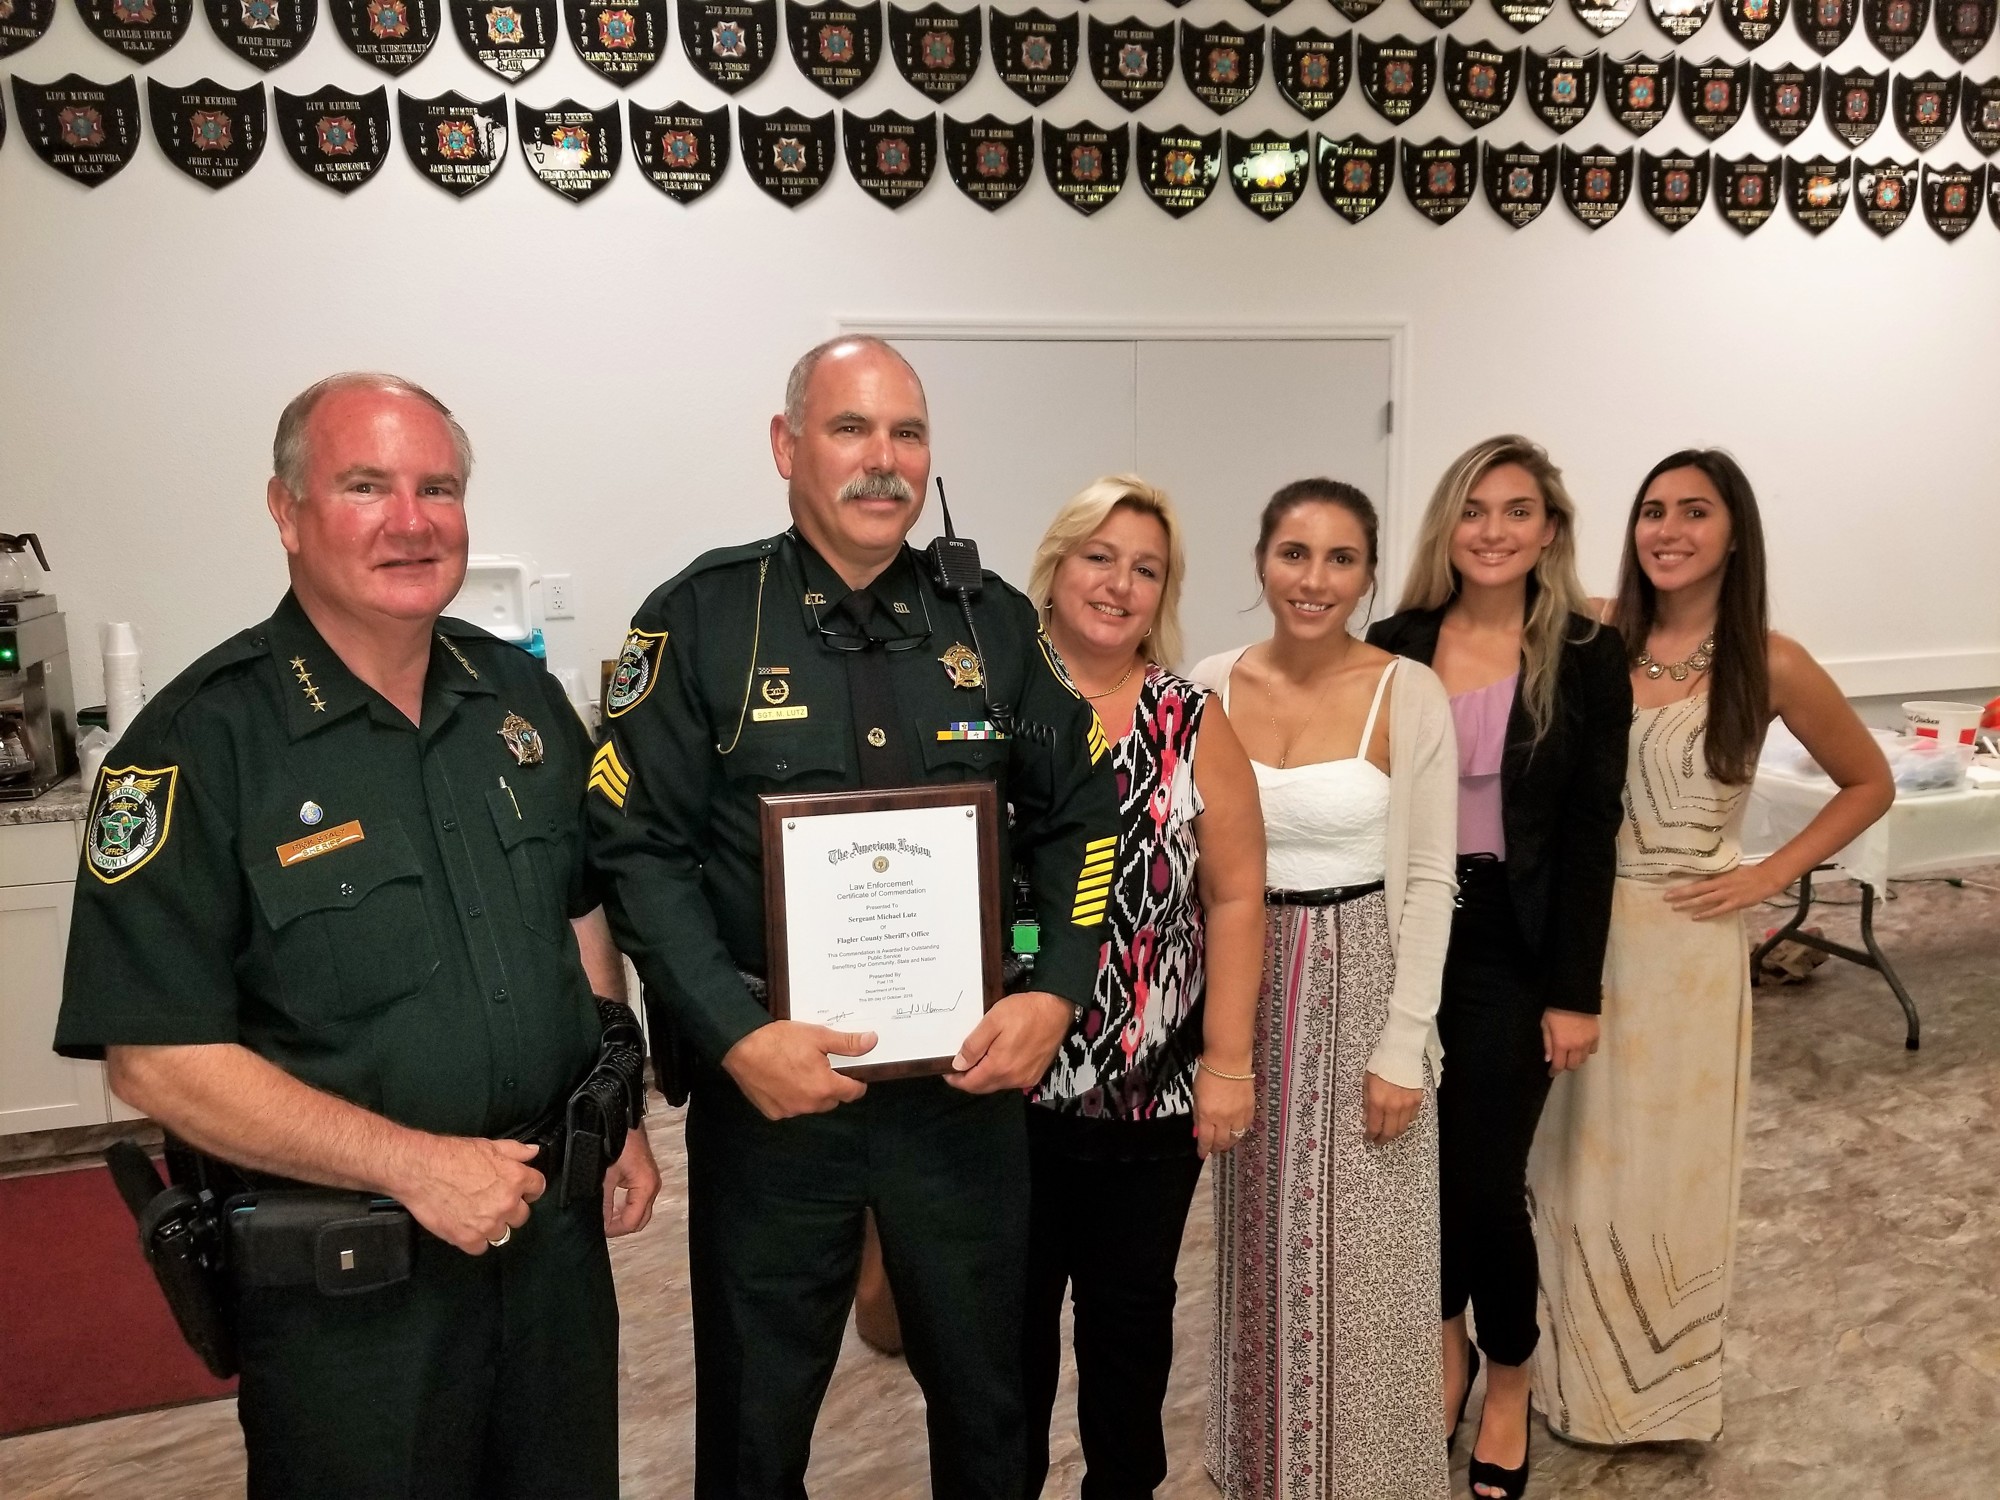 Flagler County Sheriff’s Office Sheriff Rick Staly presents Sergeant Mike Lutz with a Certificate of Commendation by the American Legion Post 115 for outstanding public service. Photo courtesy FCSO